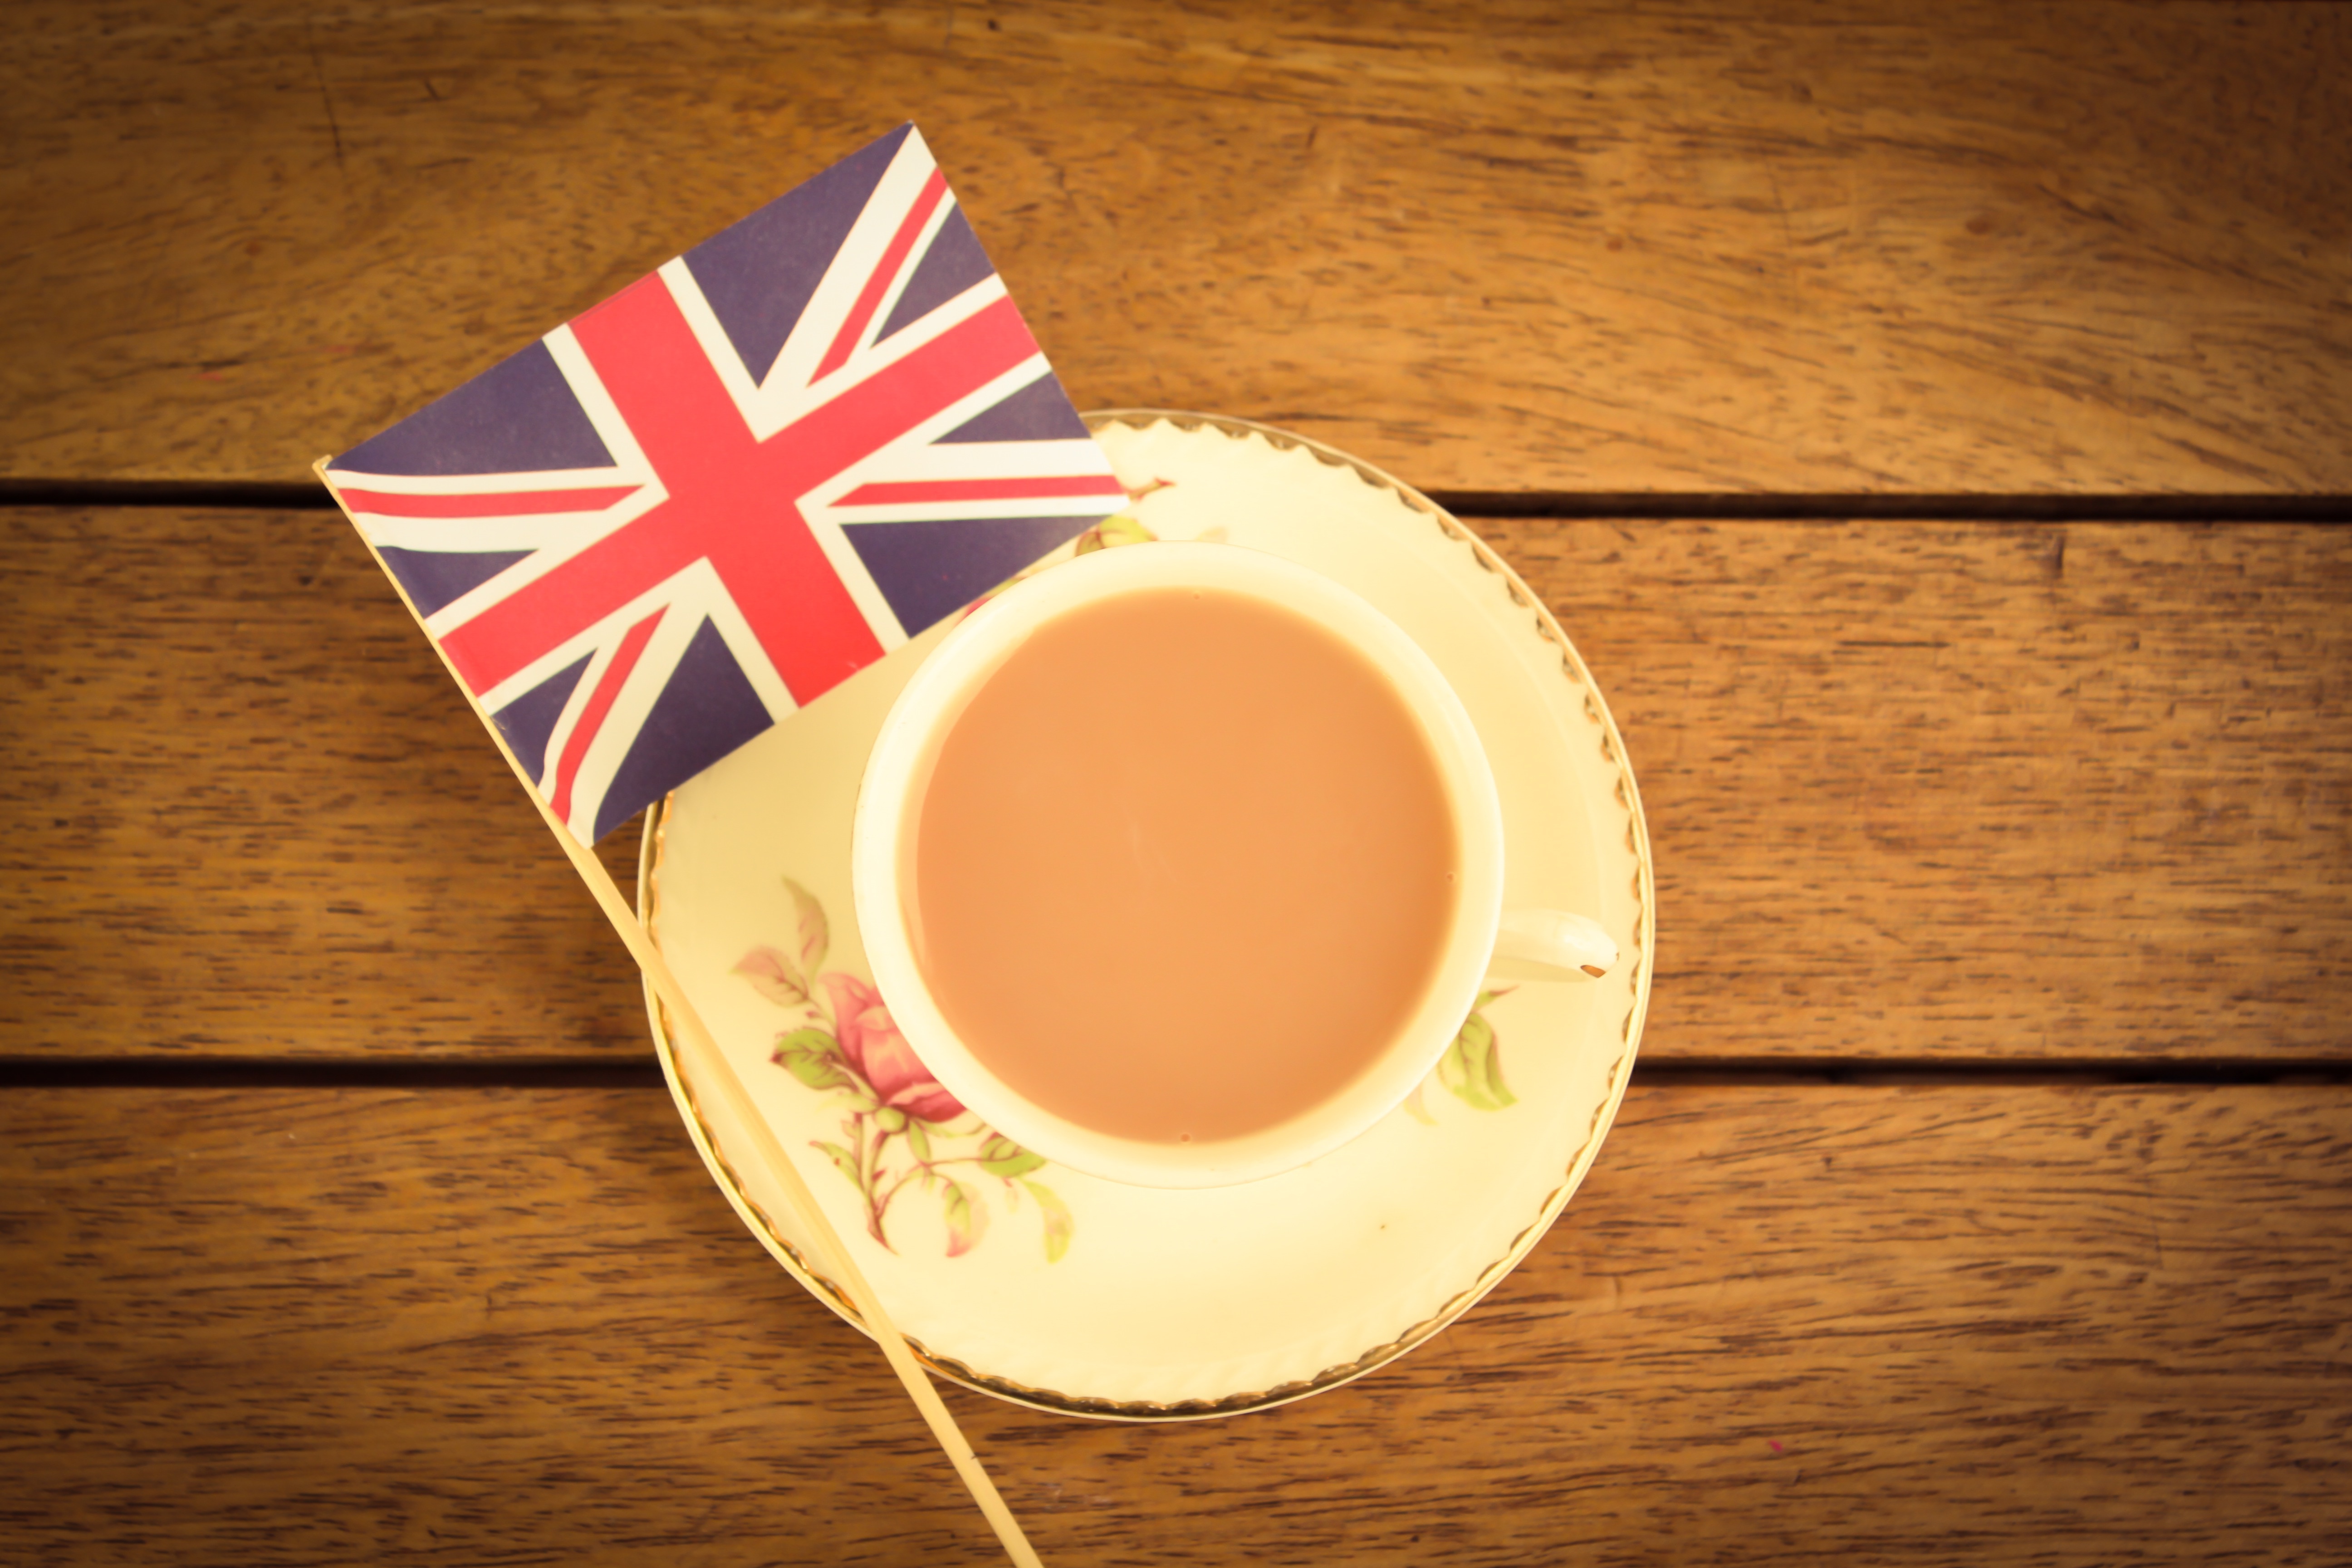 A cup of tea and a union jack on a wooden table